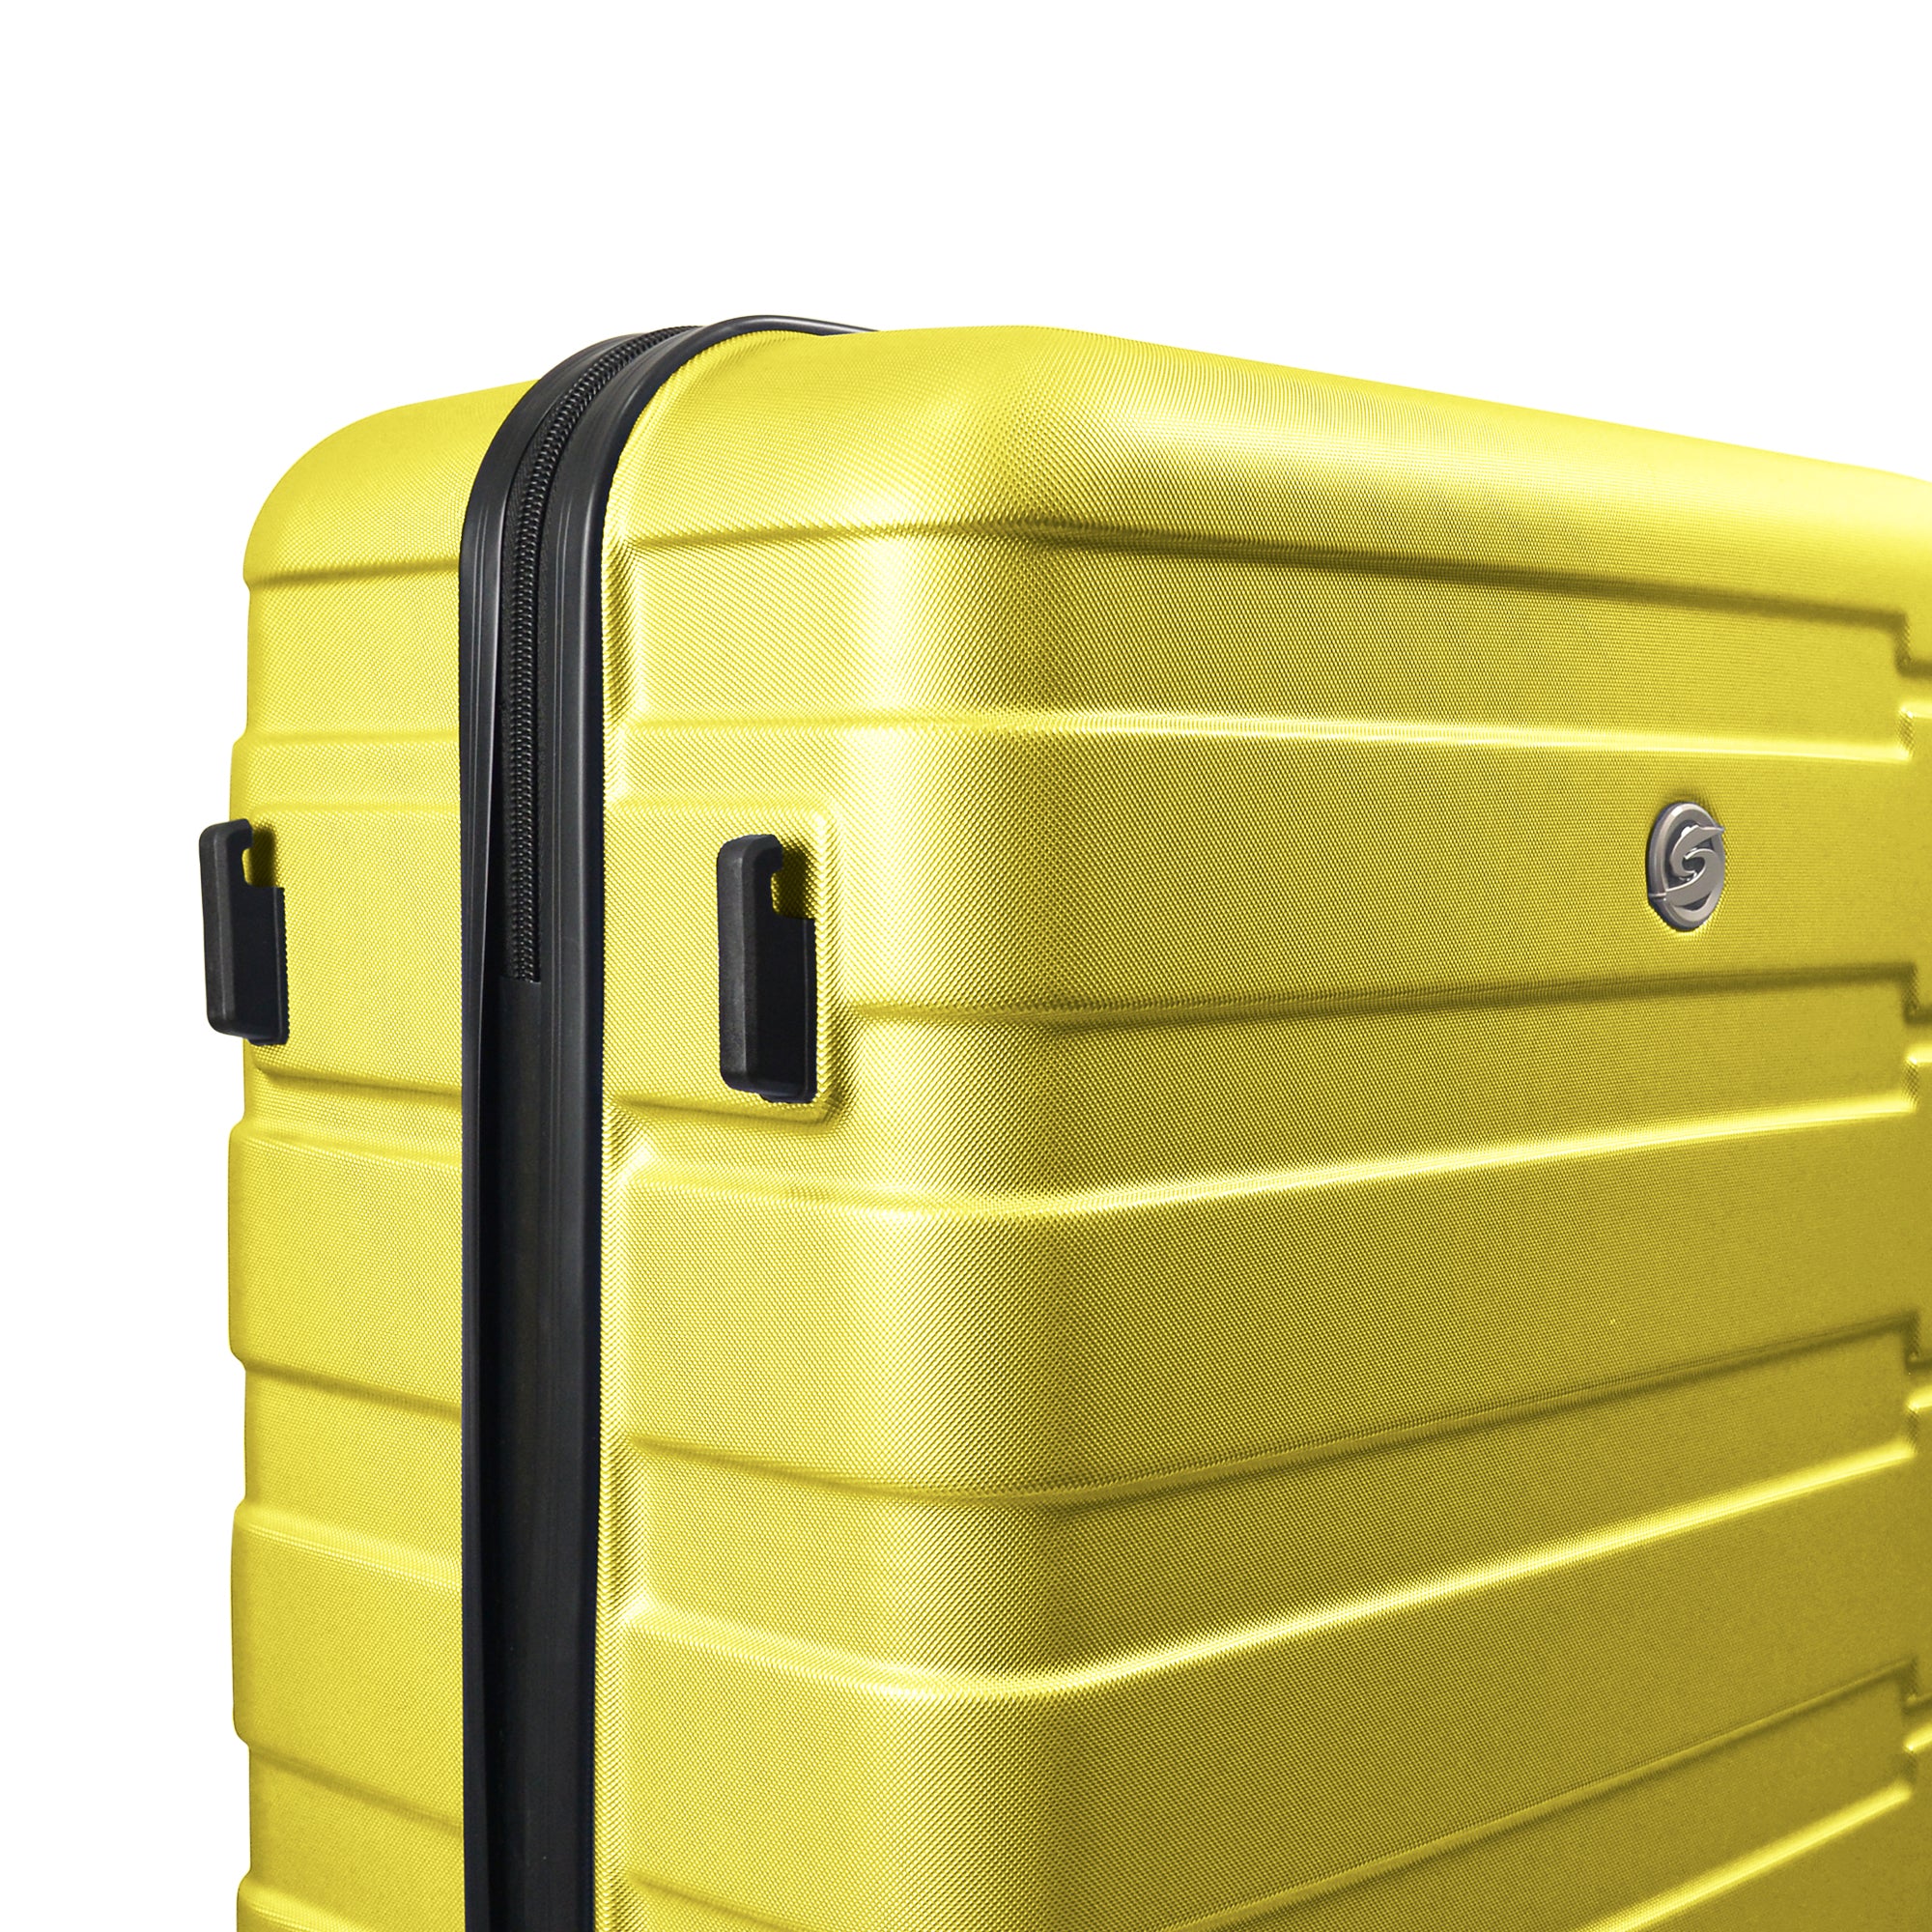 Luggage Sets 2 Piece, 20 inch 24 inch Carry on Luggage yellow-abs